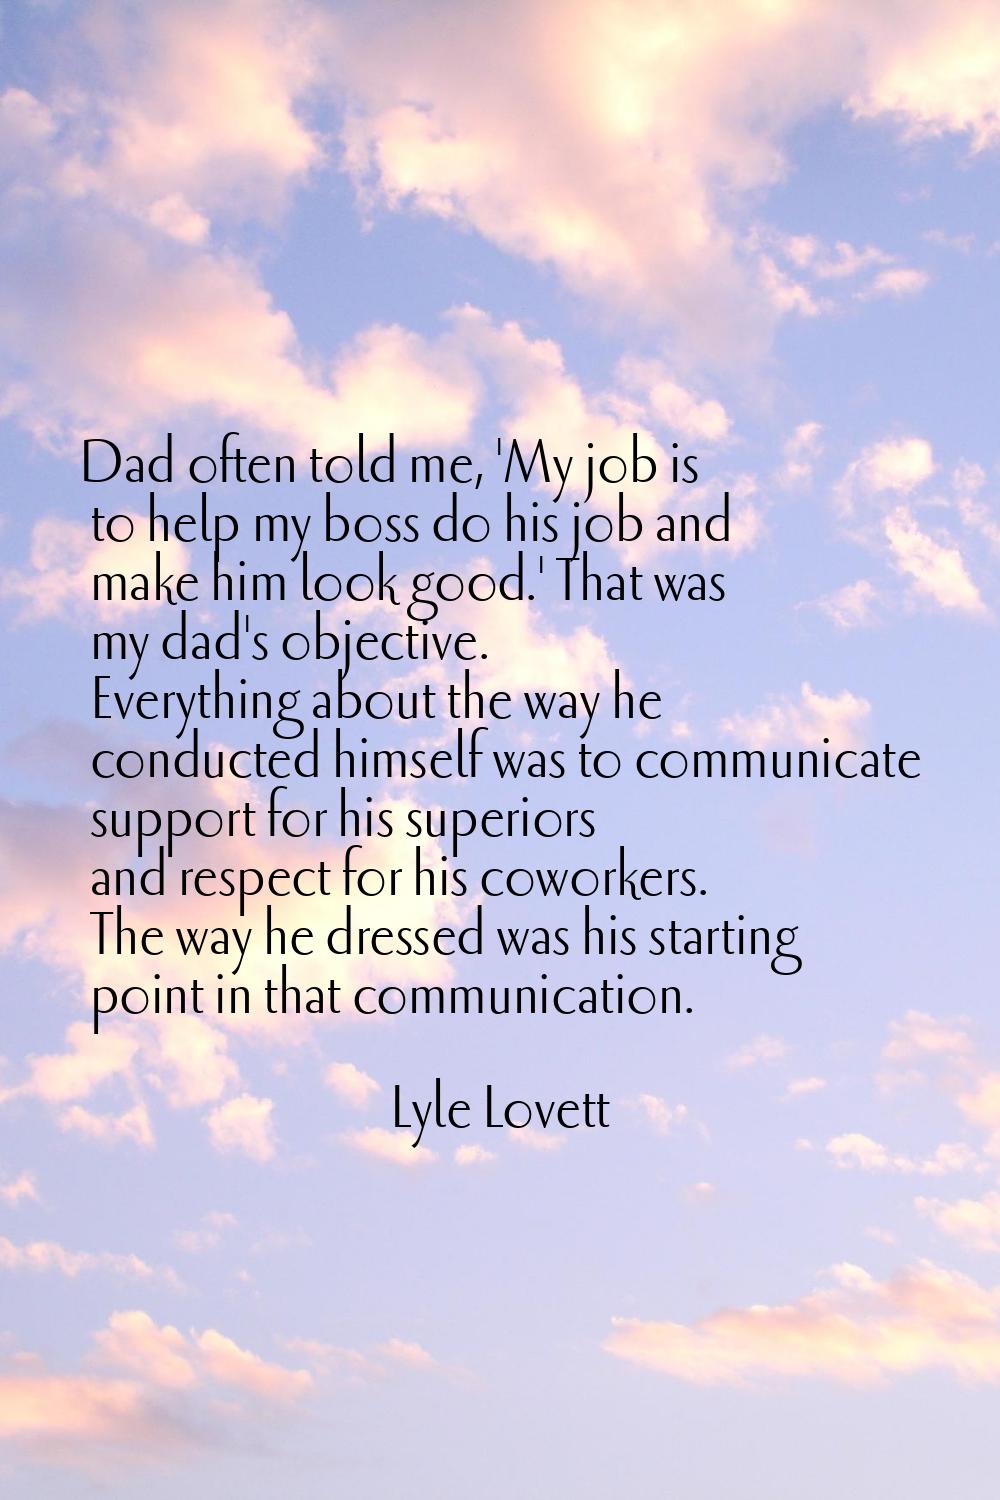 Dad often told me, 'My job is to help my boss do his job and make him look good.' That was my dad's